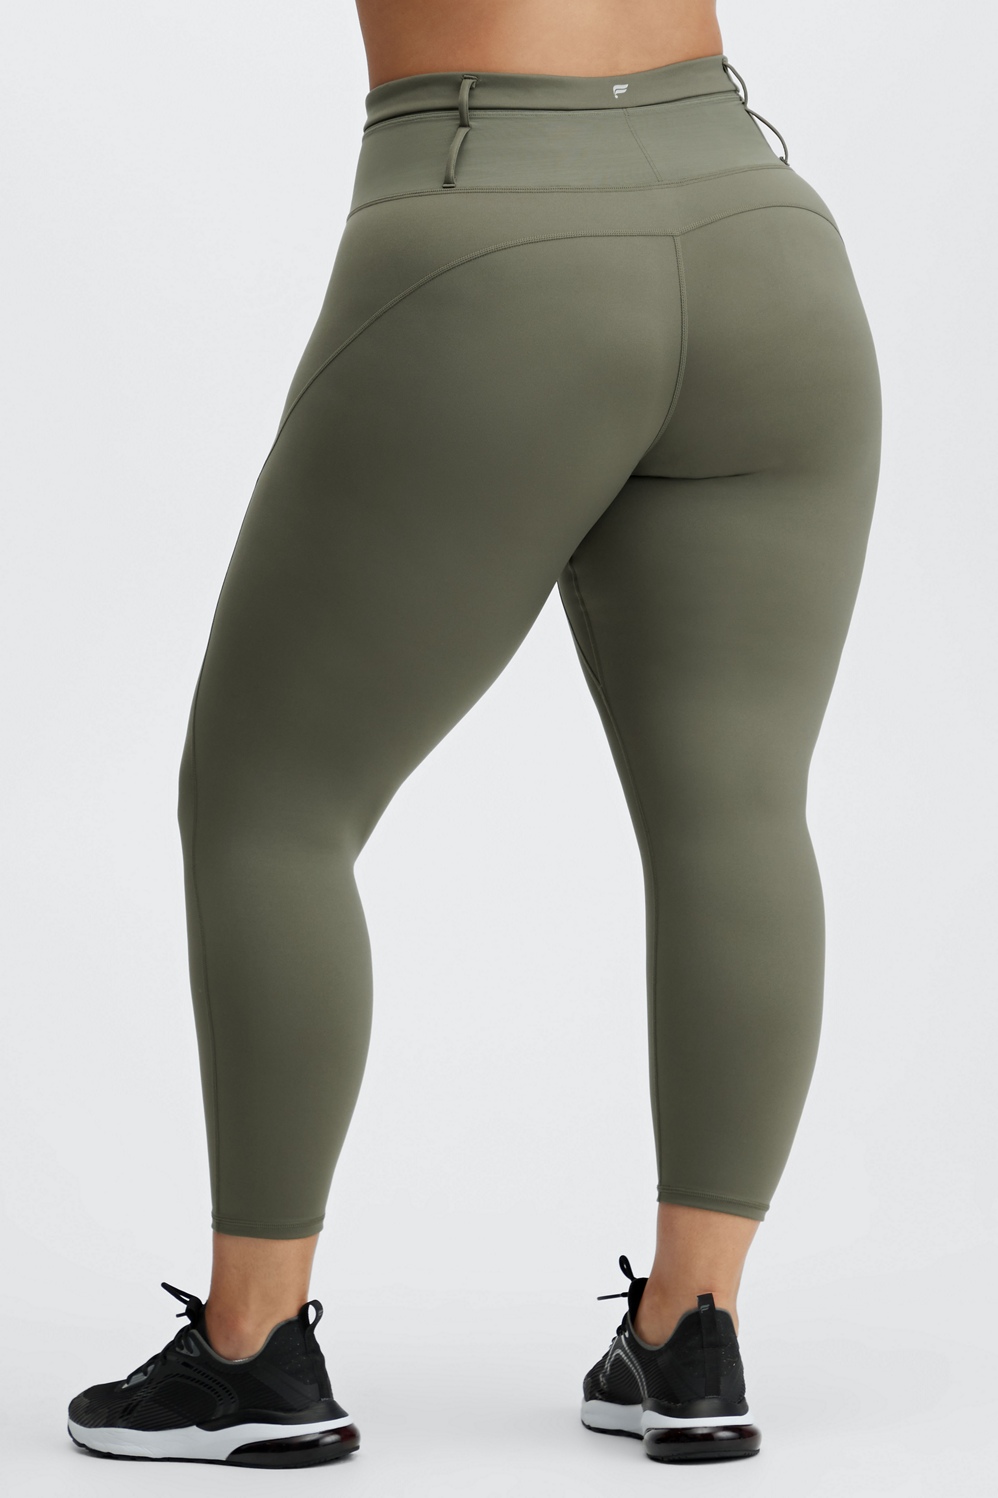 Women's High-waisted Flare Leggings - Wild Fable™ Olive Green L : Target